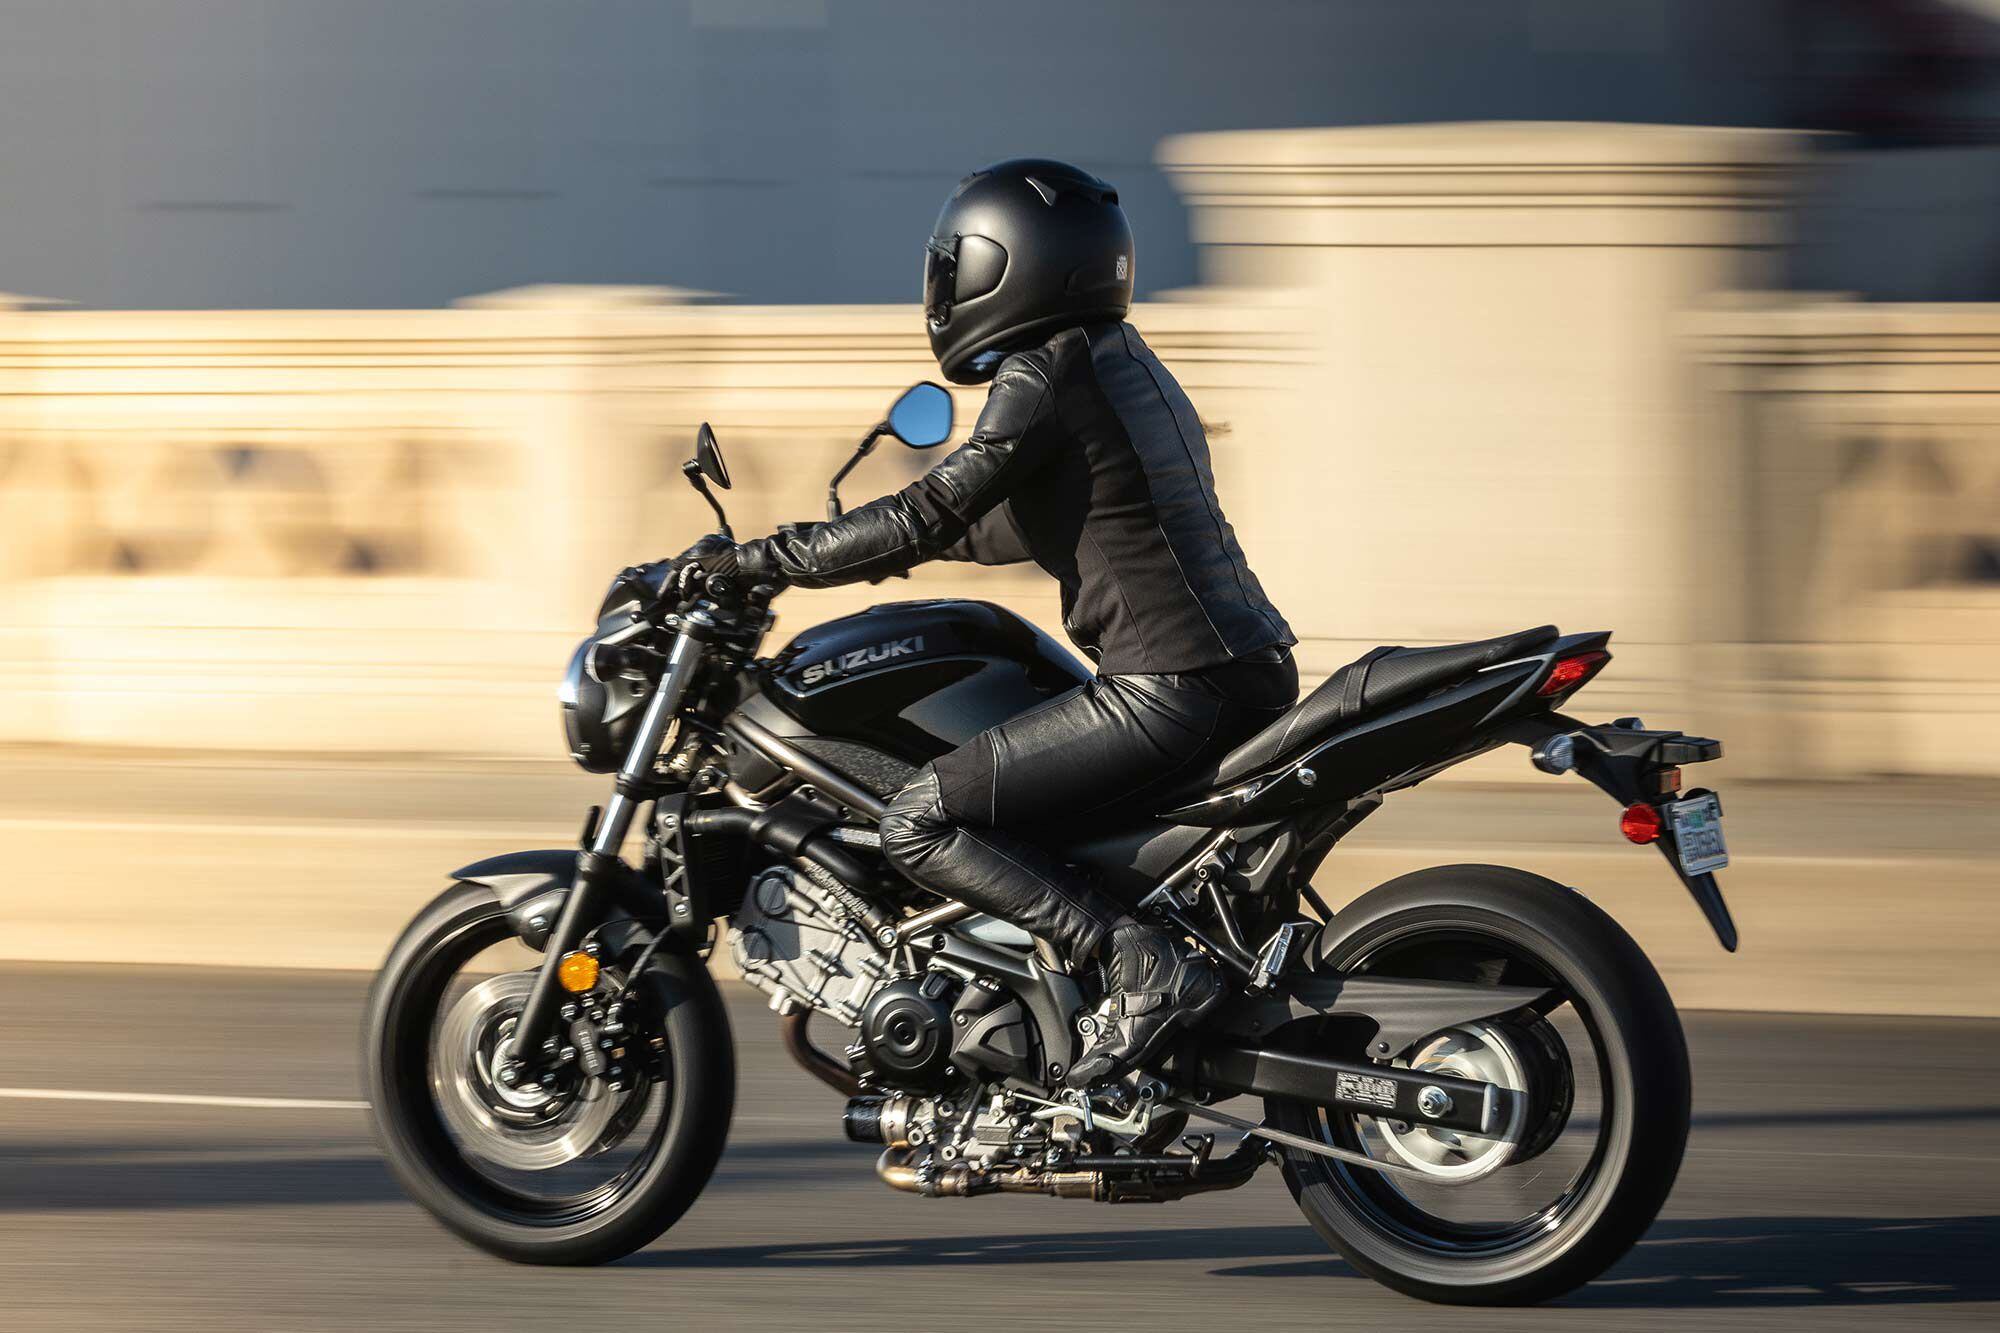 Sometimes it’s OK to not overengineer a motorcycle. Suzuki’s straightforward approach to motorcycle design makes the SV650 a capable and practical motorcycle for everyday riding.